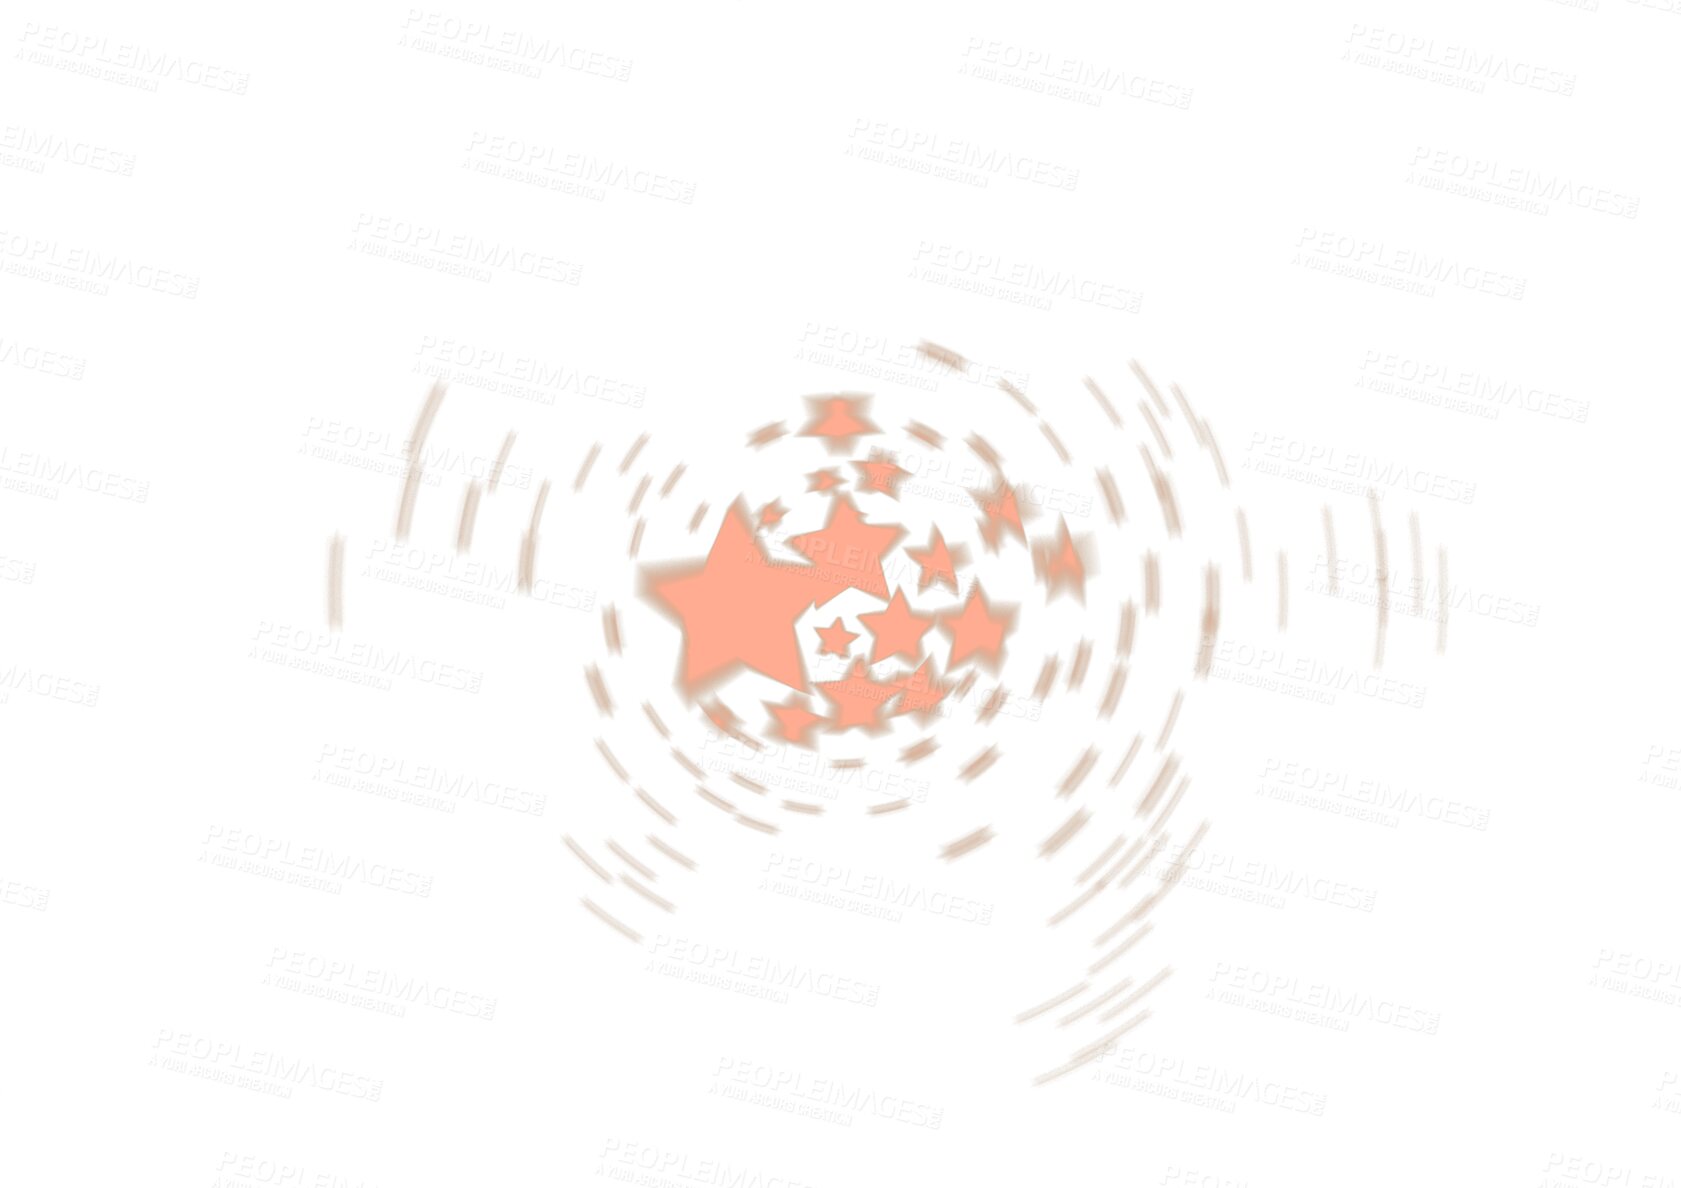 Buy stock photo Star icon, sign and symbol with pattern and color for website design or mobile app development. Swirl and element of a spiral graphic isolated on a transparent and PNG image format background